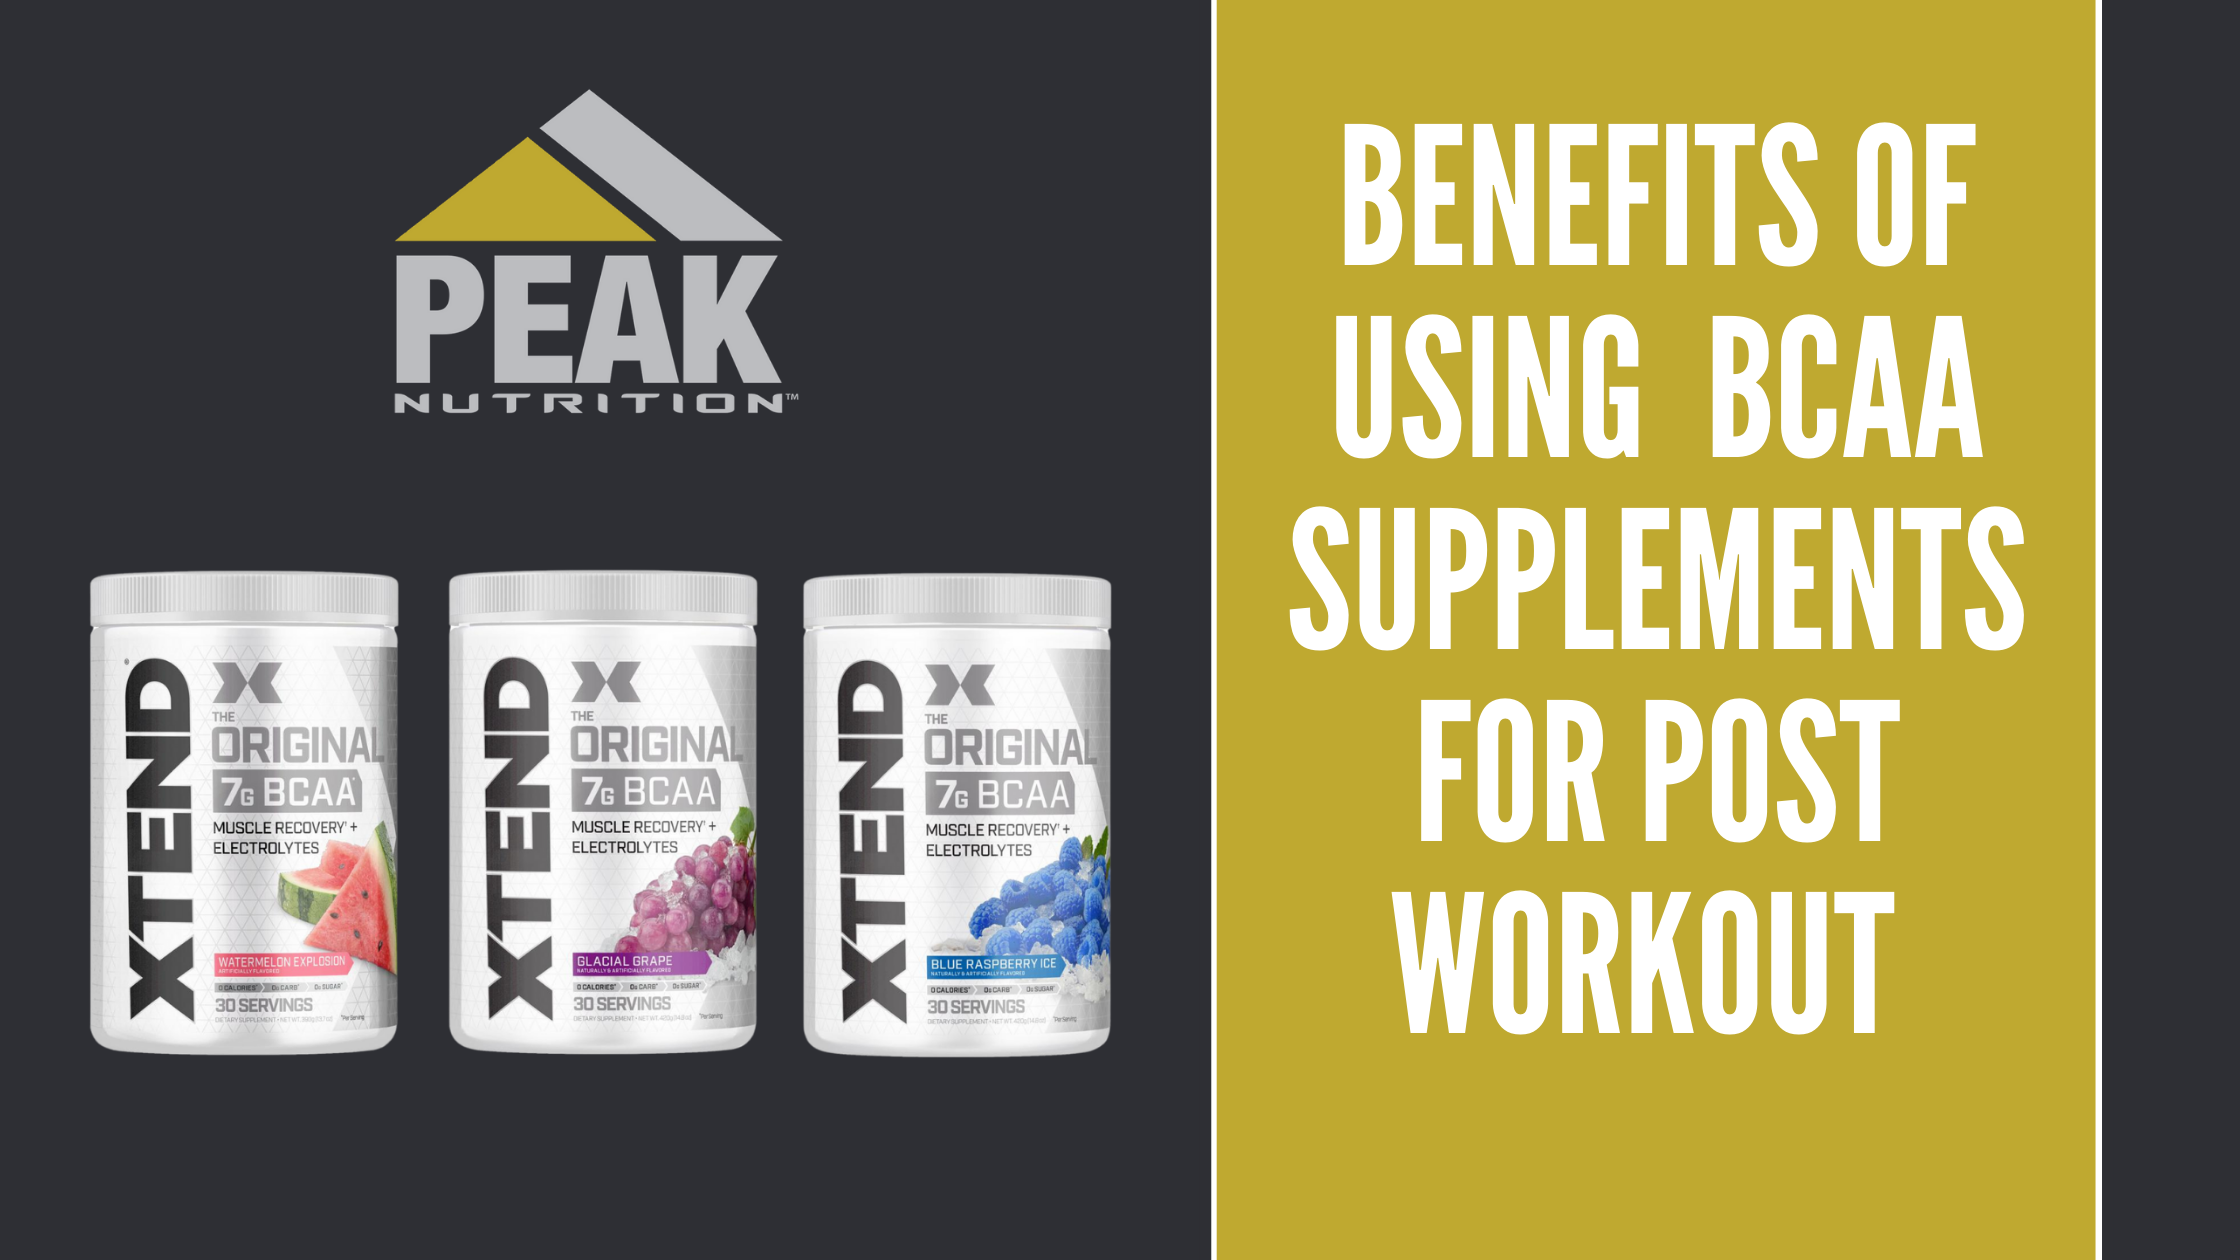 xtend bcaa supplements with peak nutrition logo